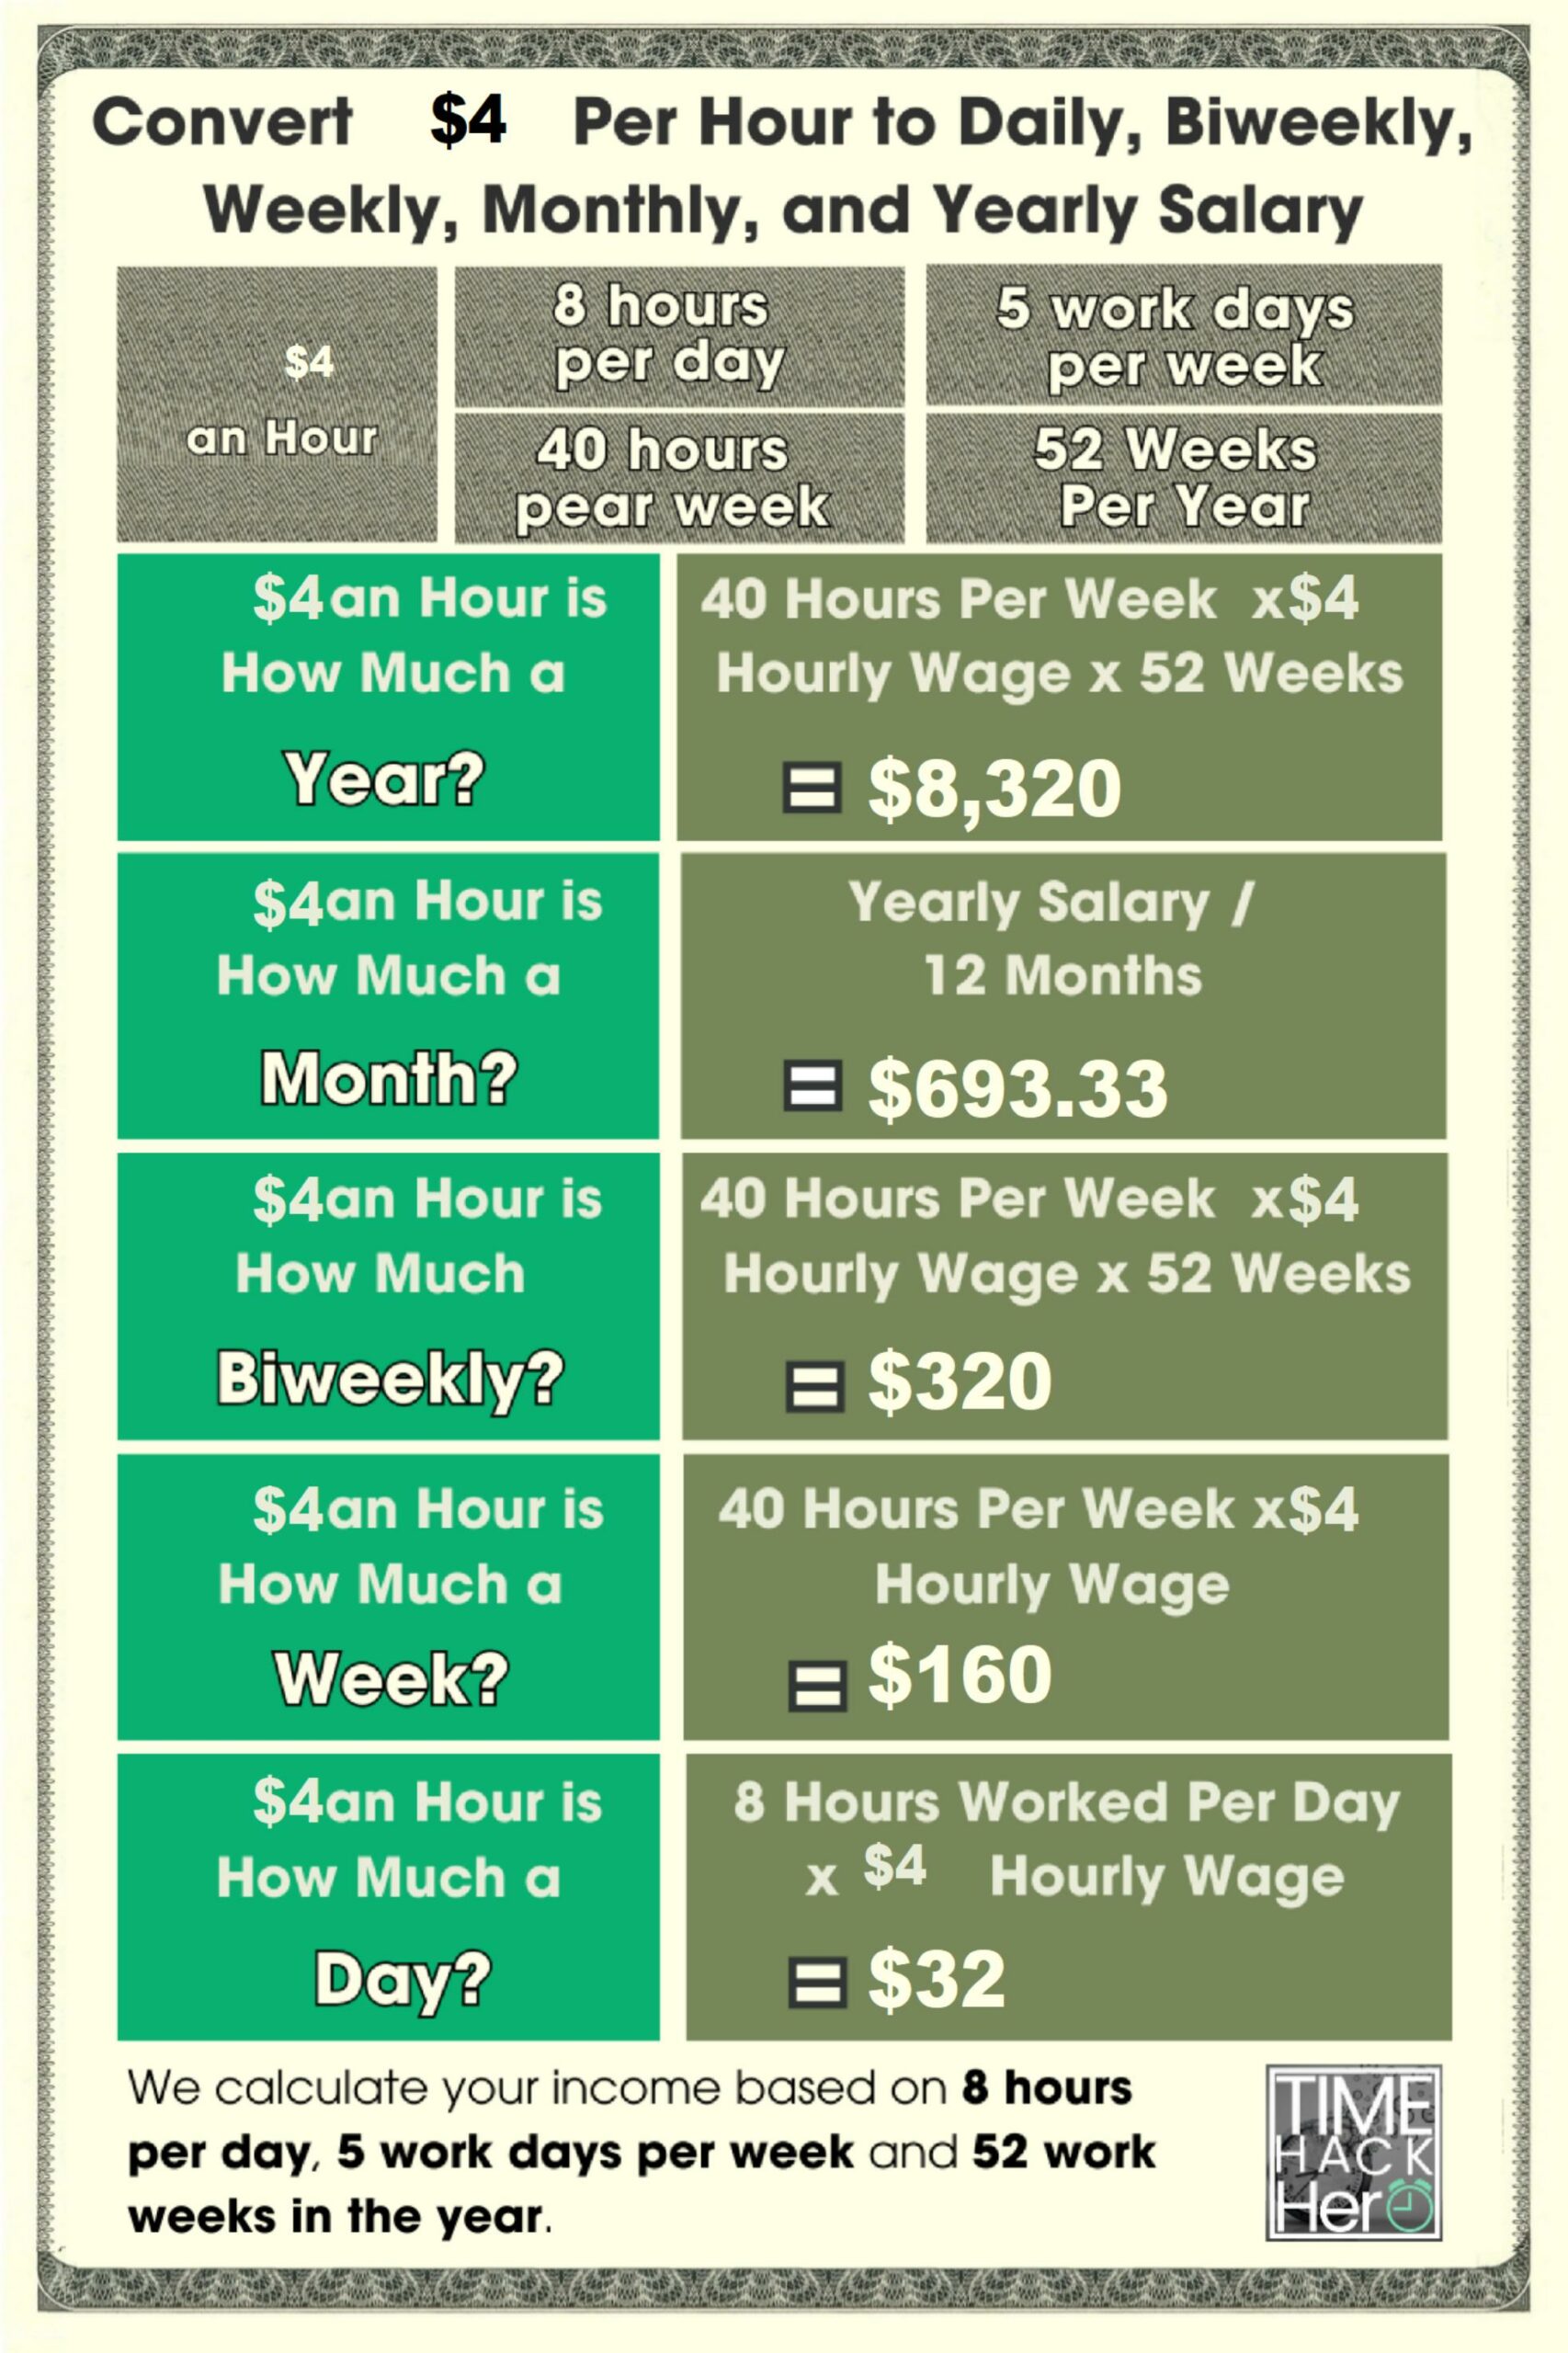 Convert $4 Per Hour to Weekly, Monthly, and Yearly Salary